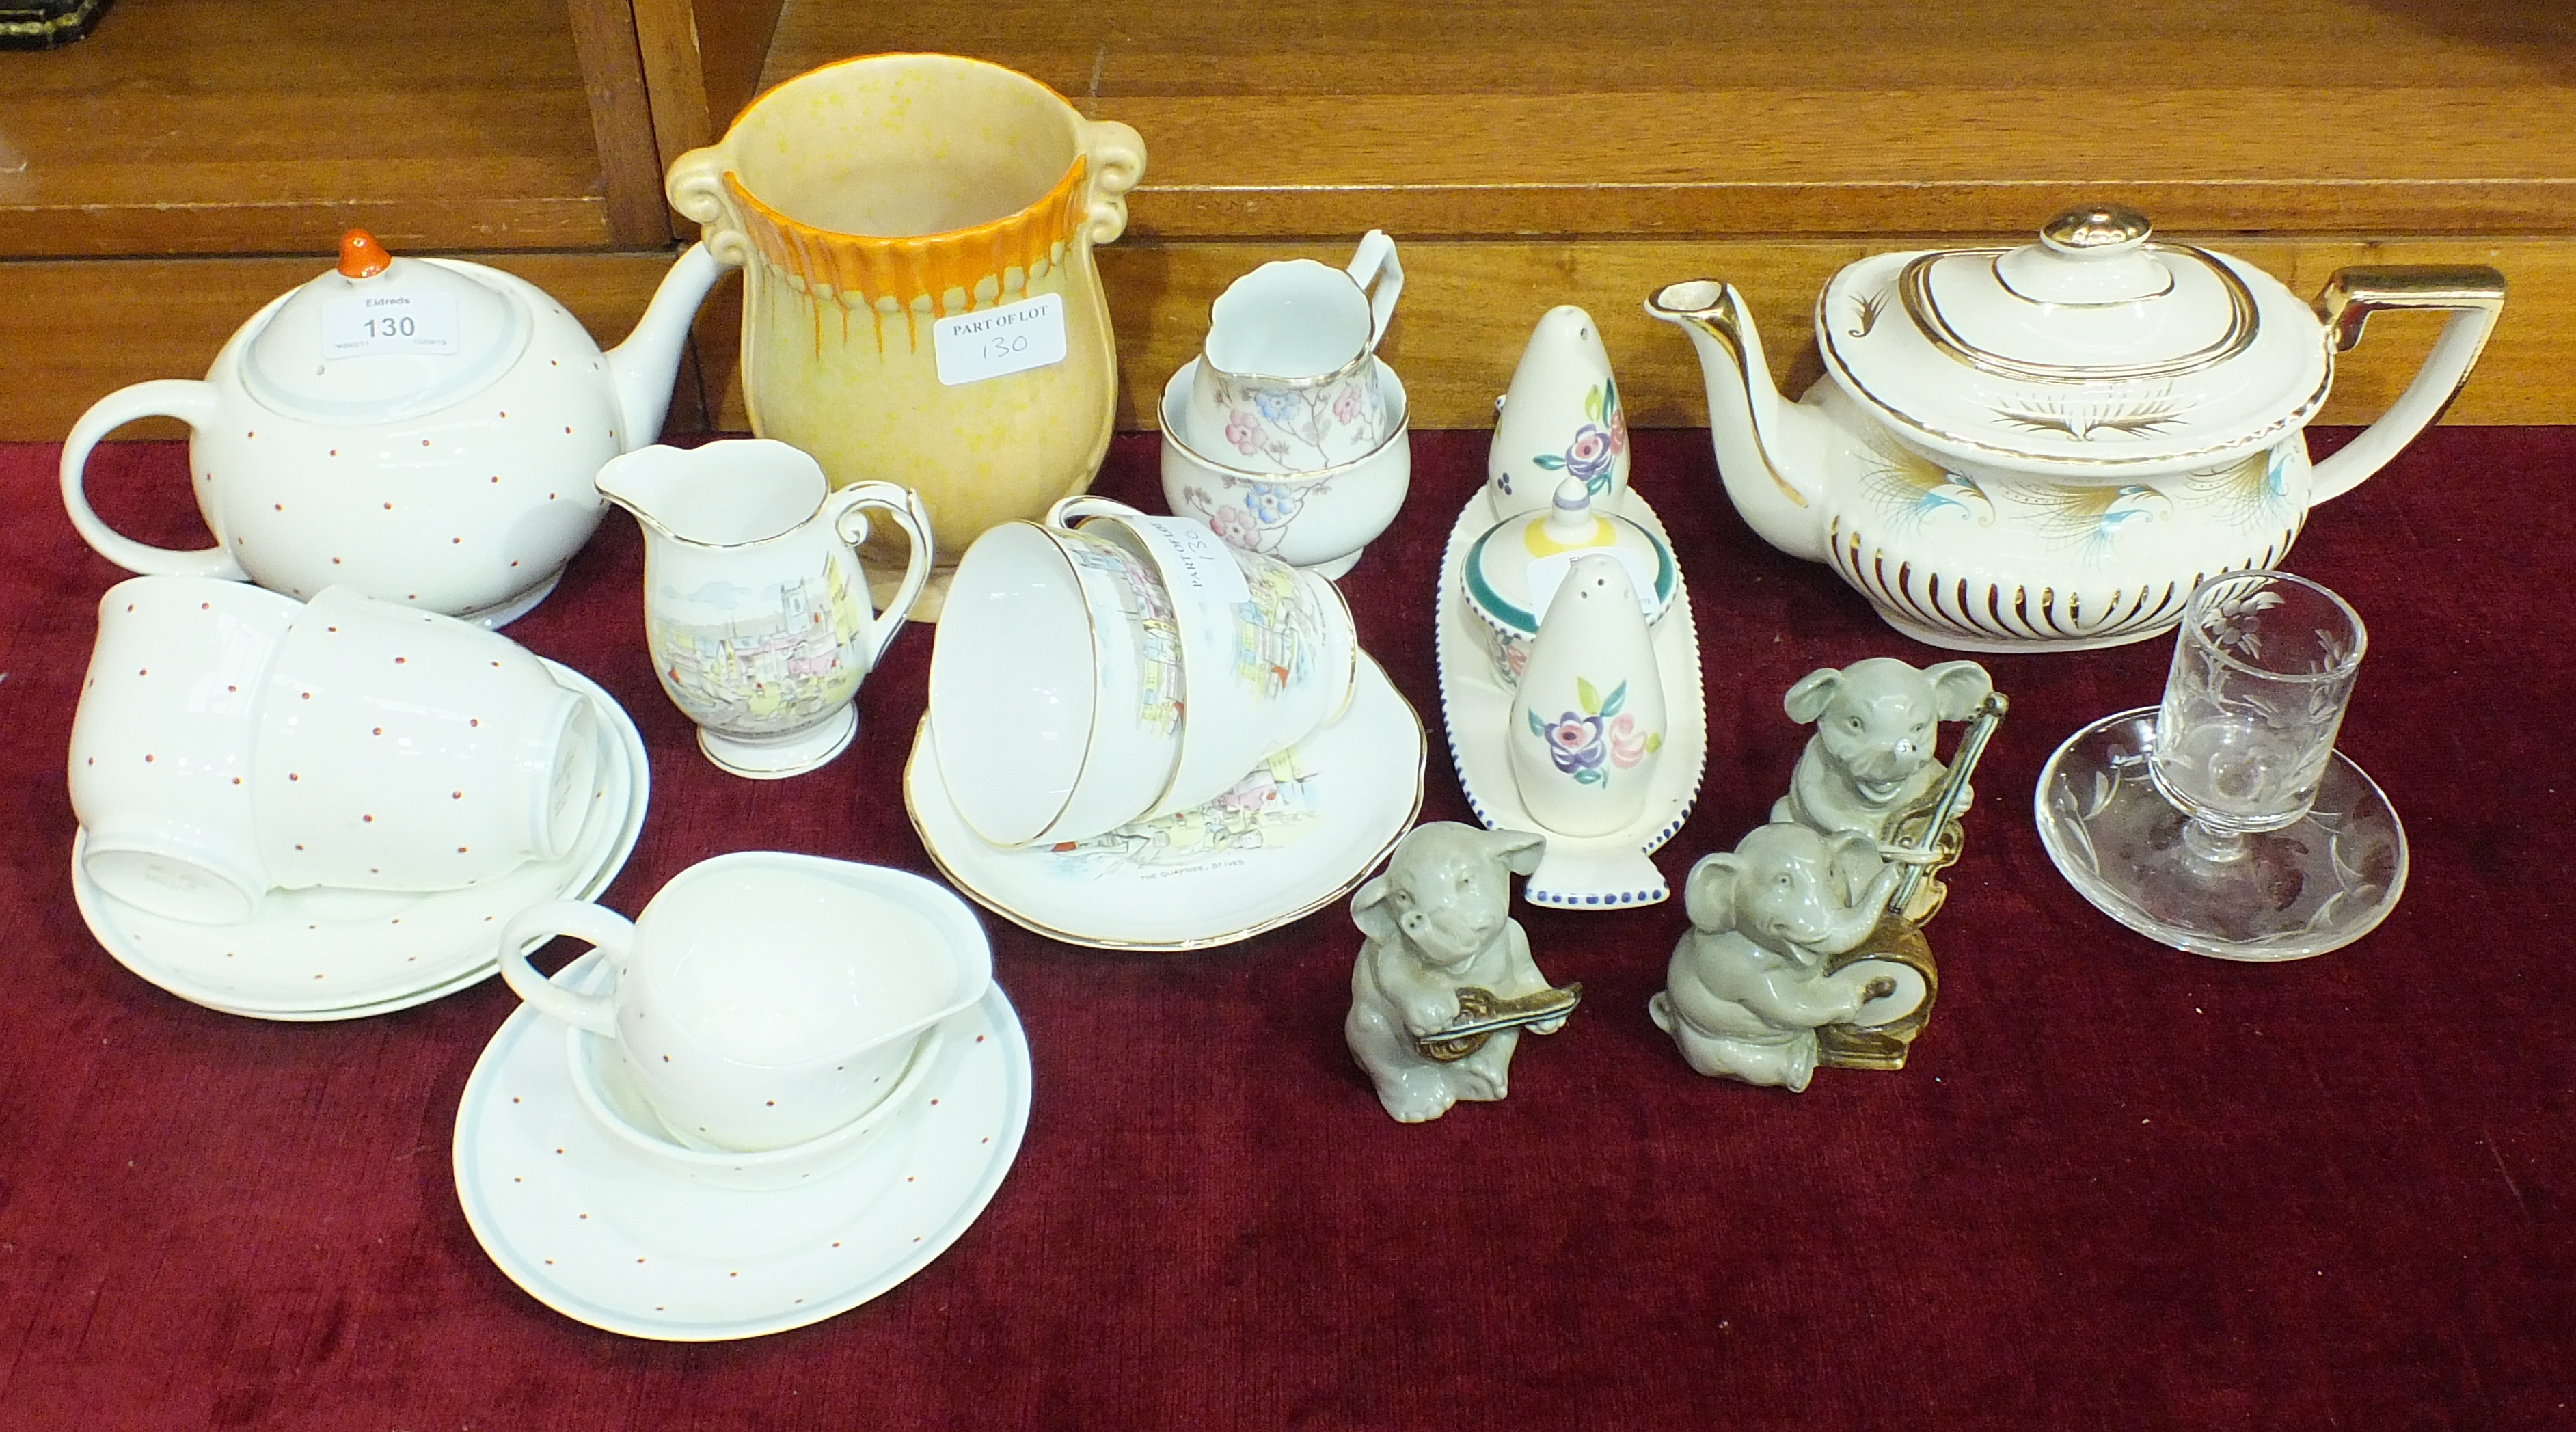 A Susie Cooper tea set for two decorated with red spots, a Poole Pottery cruet set, etc.